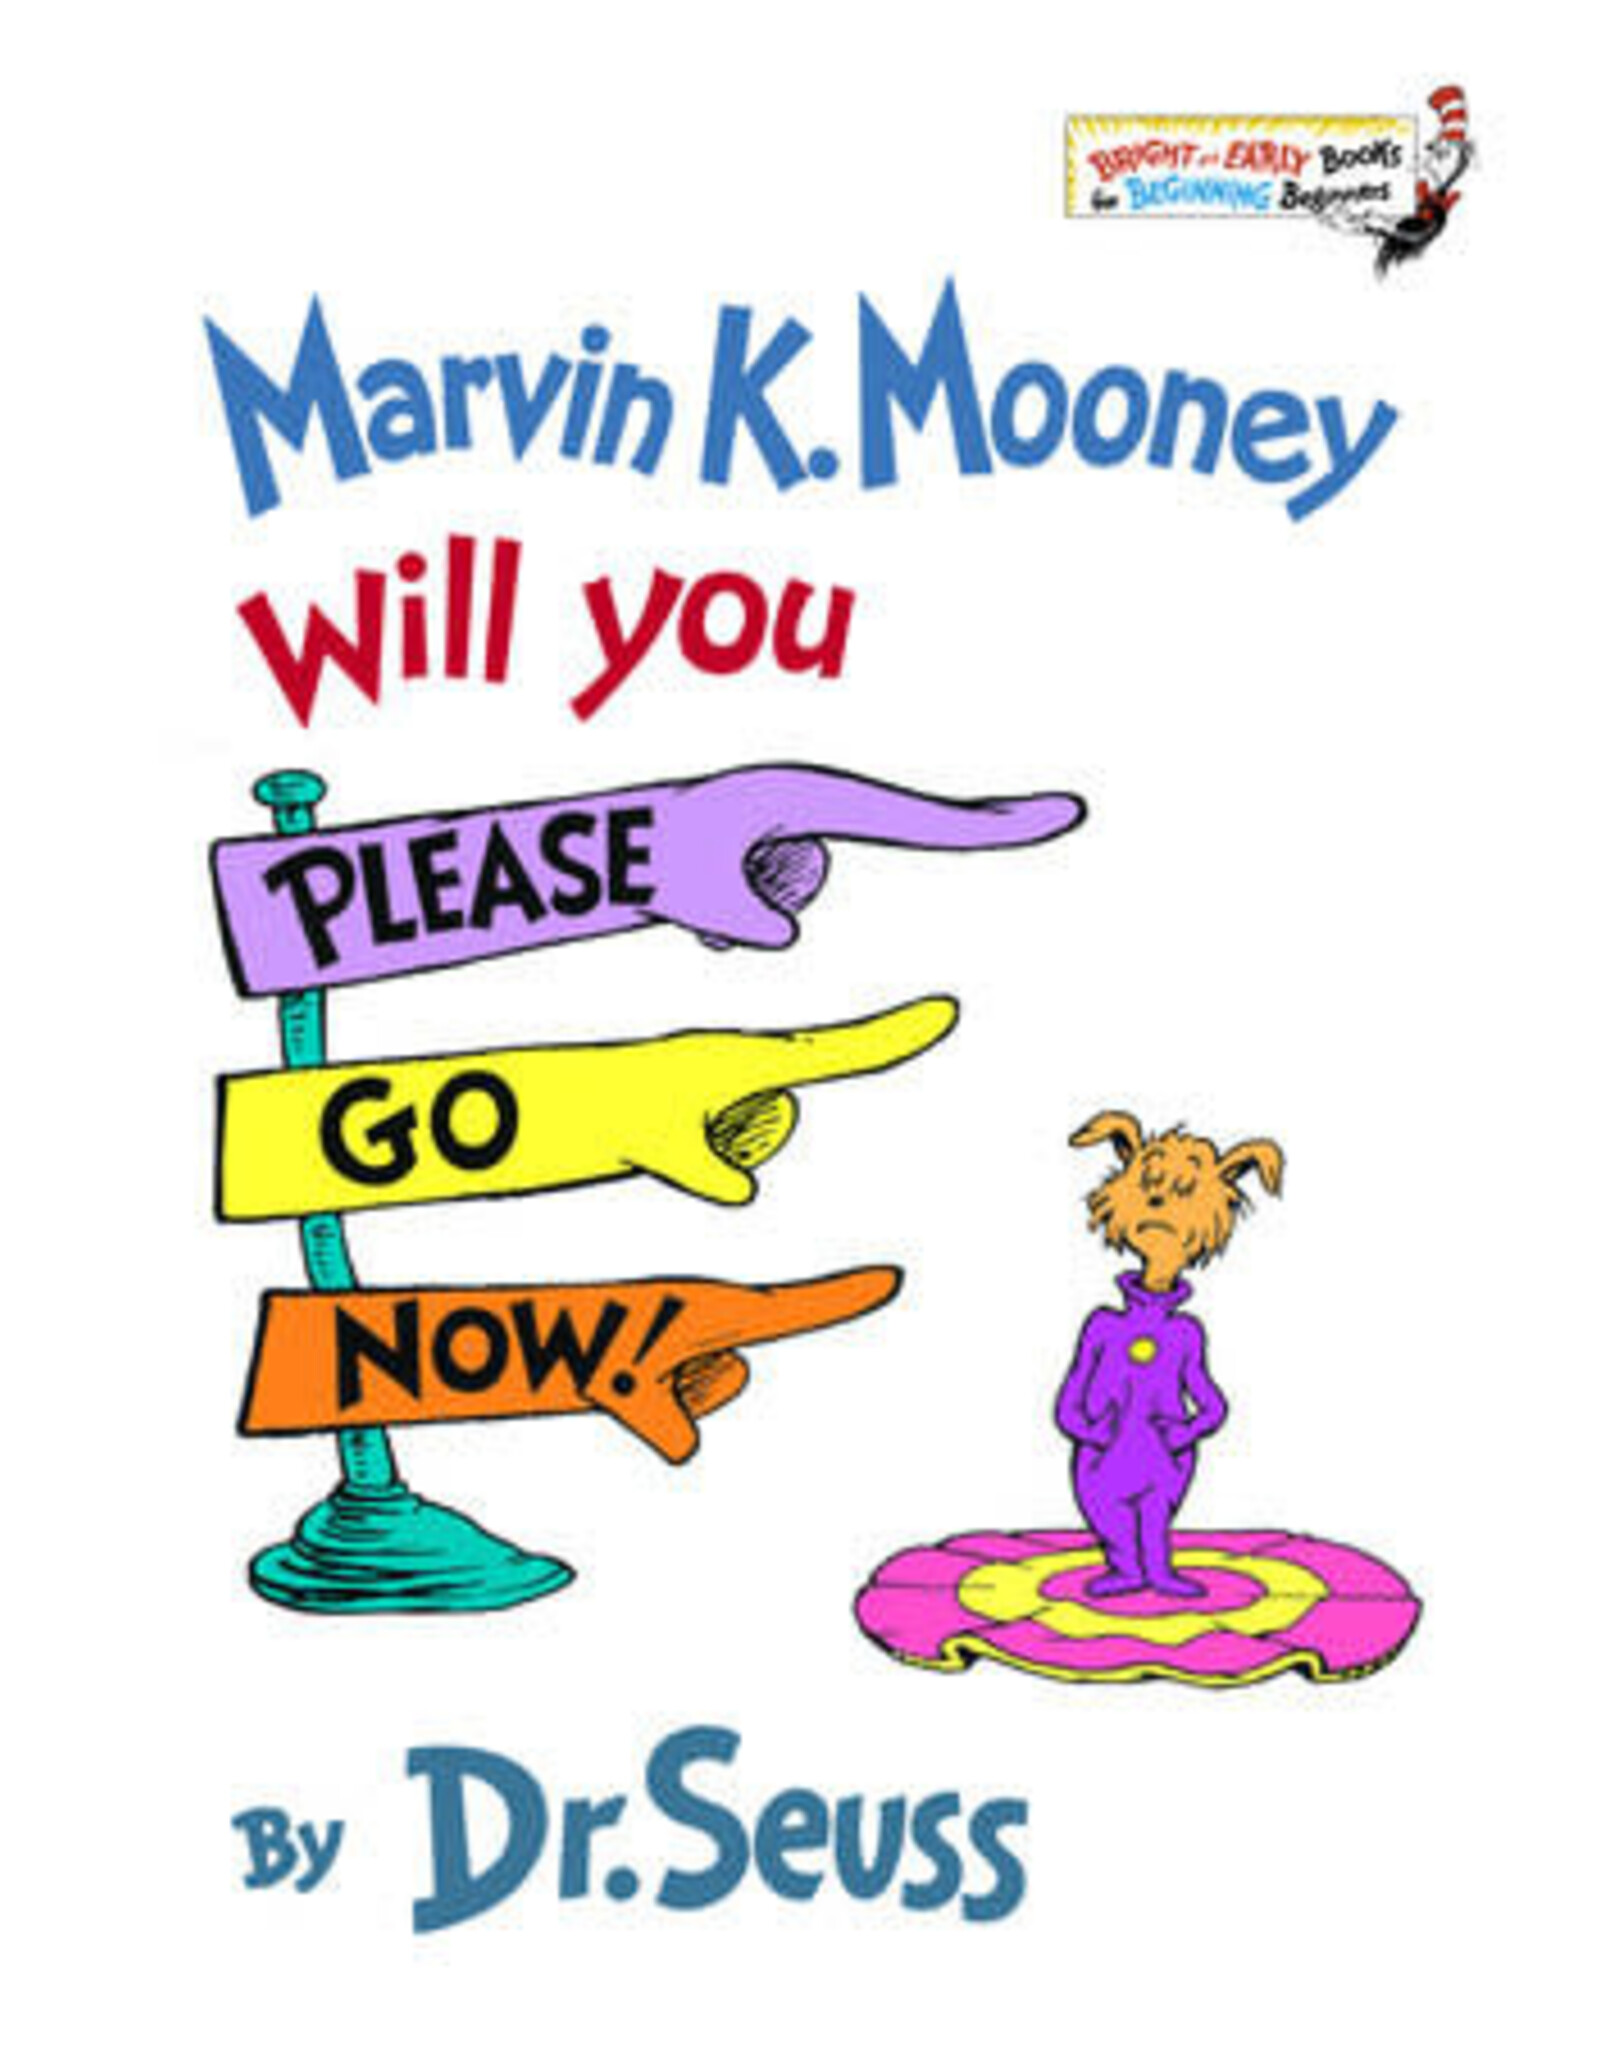 Marvin K. Mooney Will You Please Go Now! by Dr. Seuss